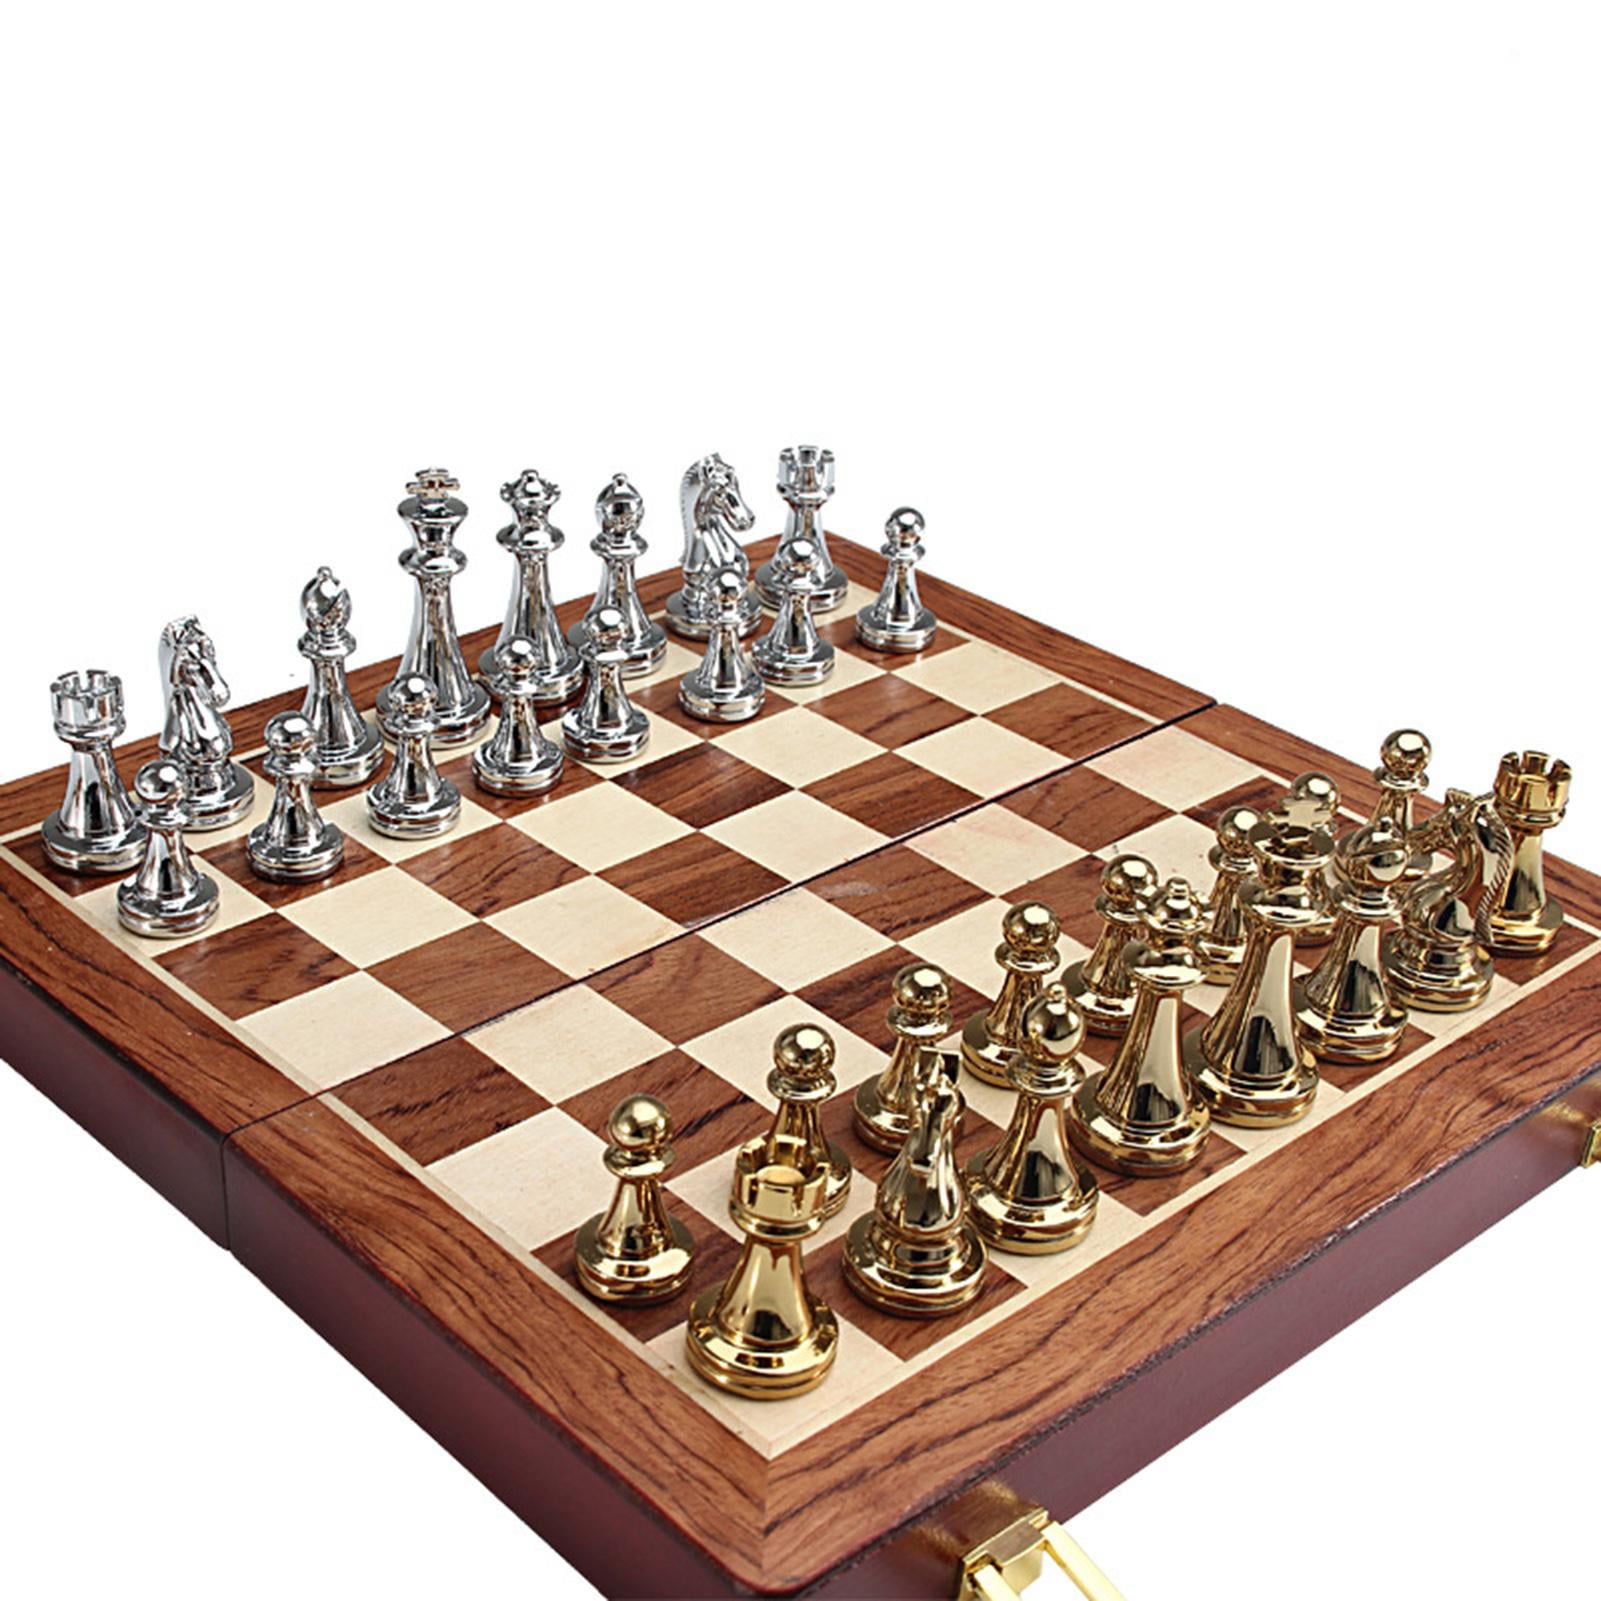 Bala Chess Board Game Set Wood Wooden Inlaid Storage METAL Pieces 12 Inch NEW 